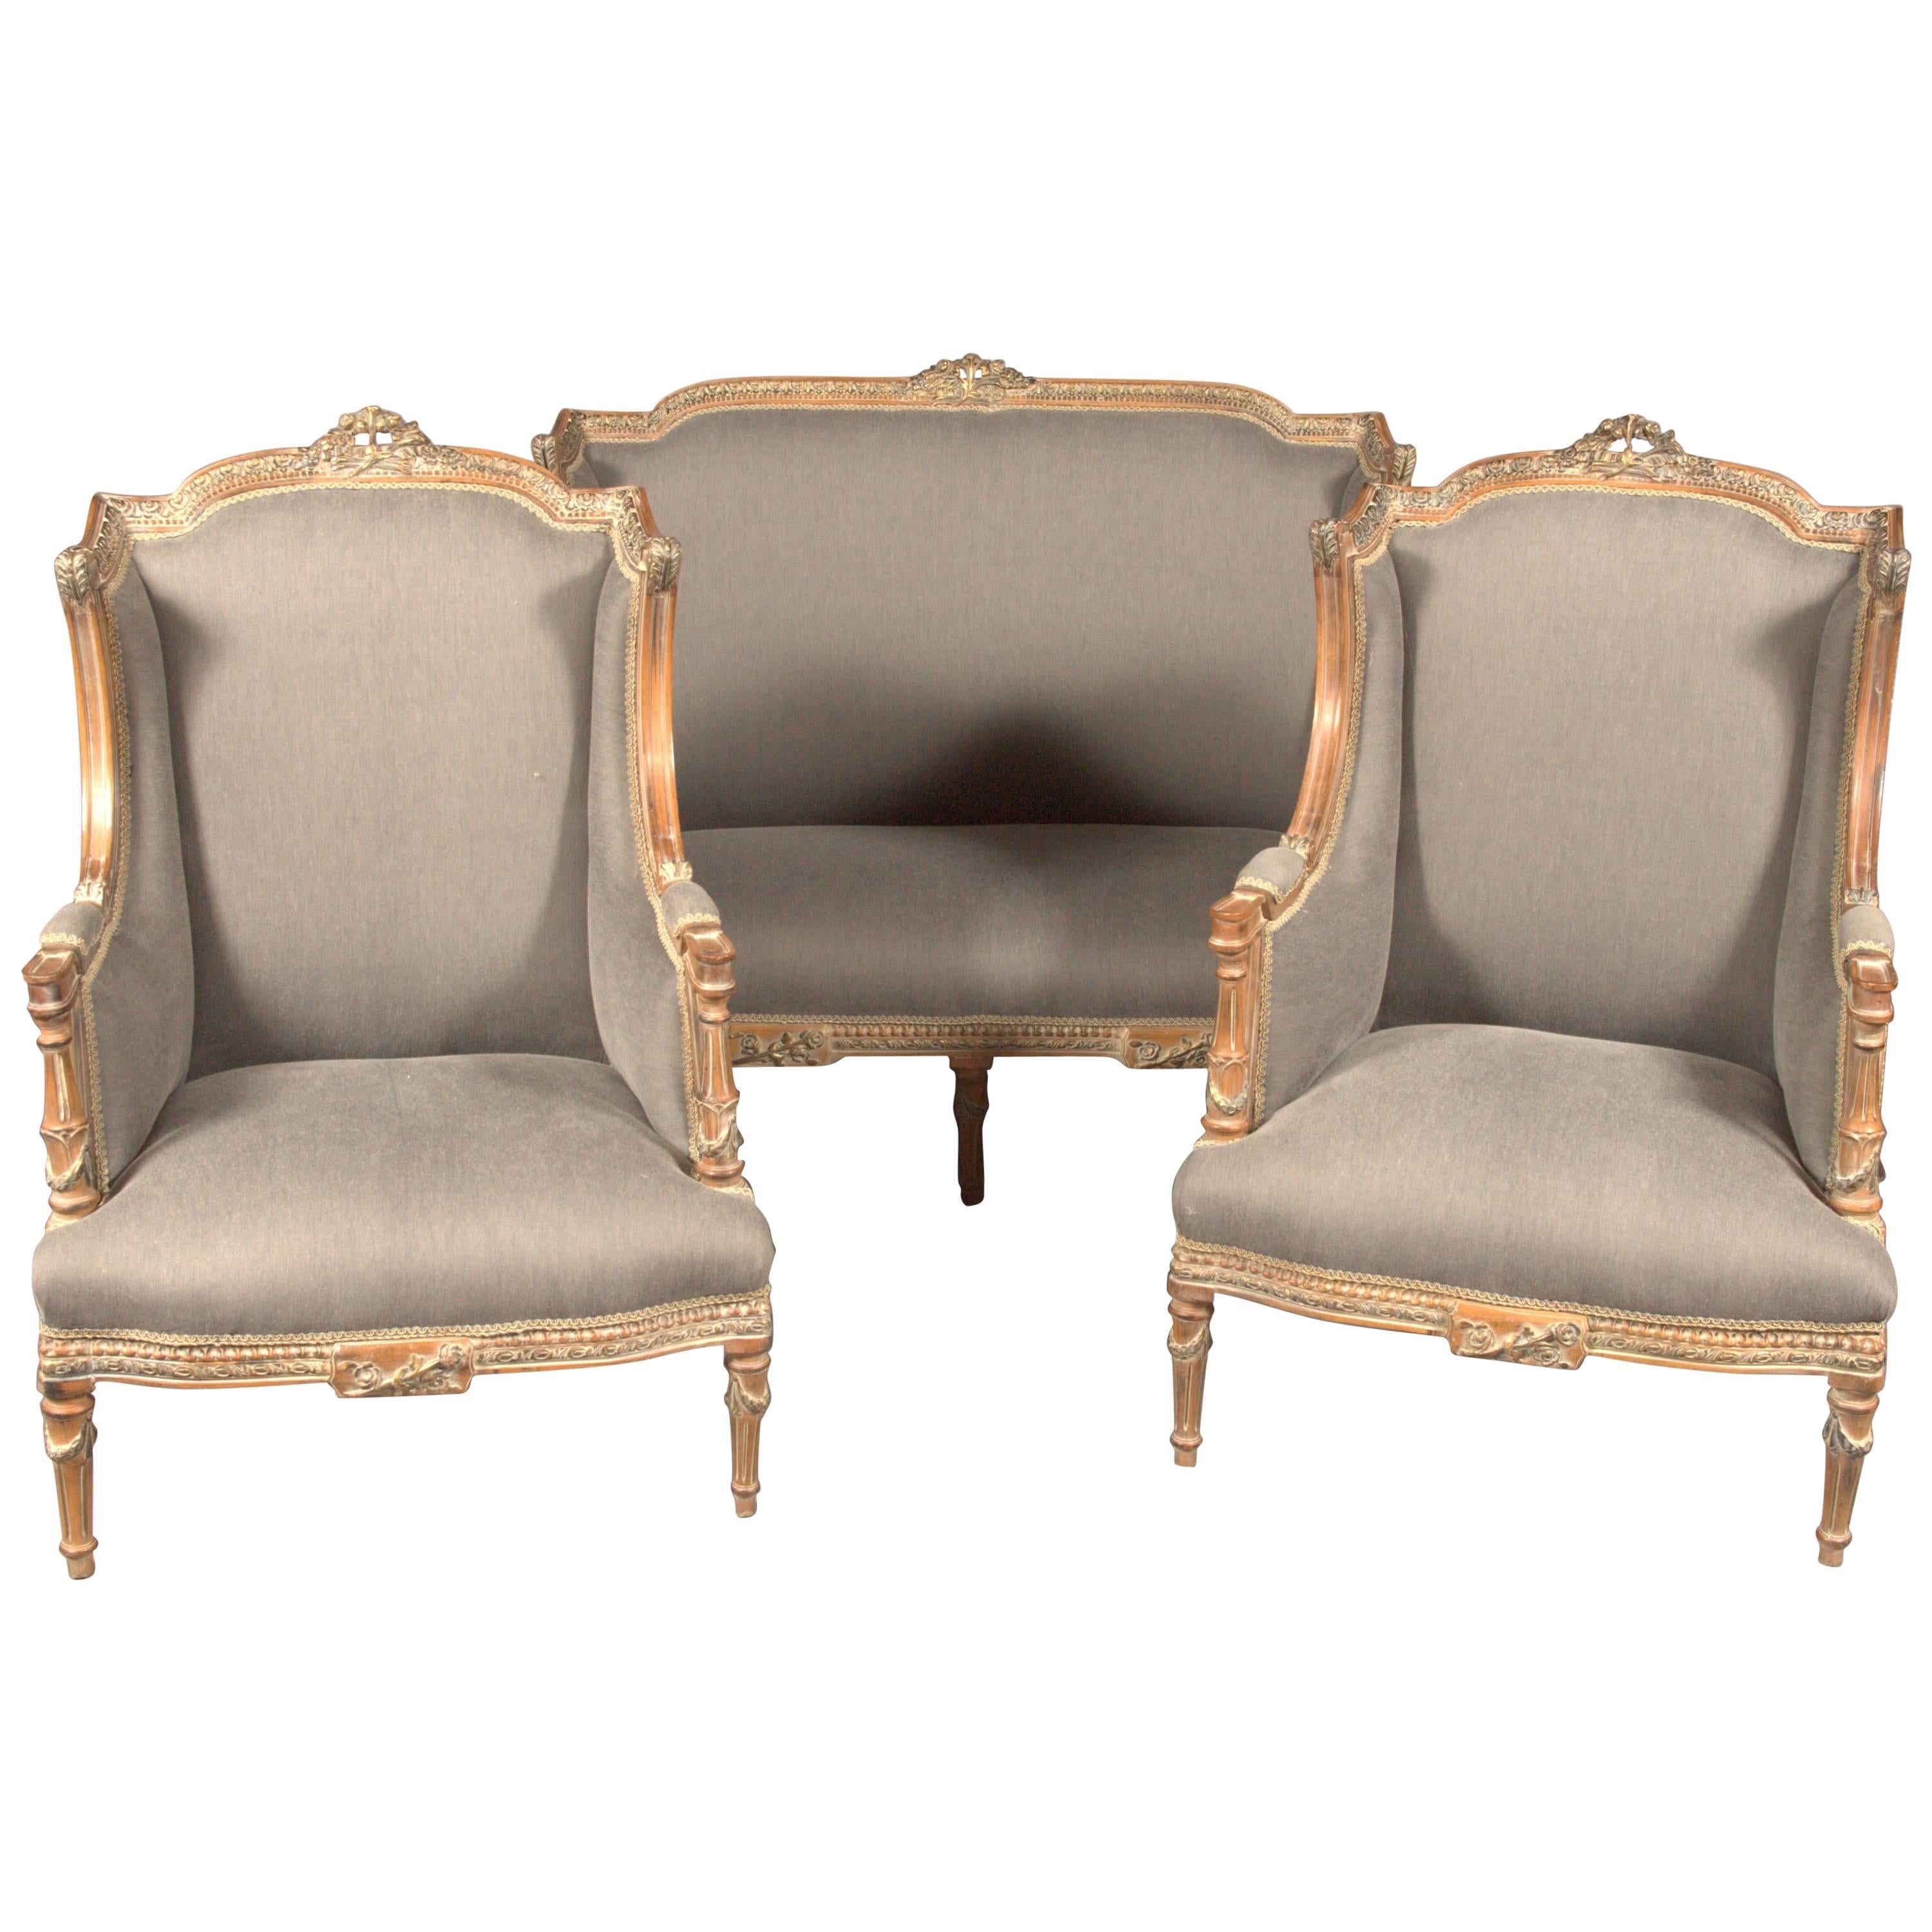 20th Century Classic Seating Set of Three Pieces in the Louis XVI Style